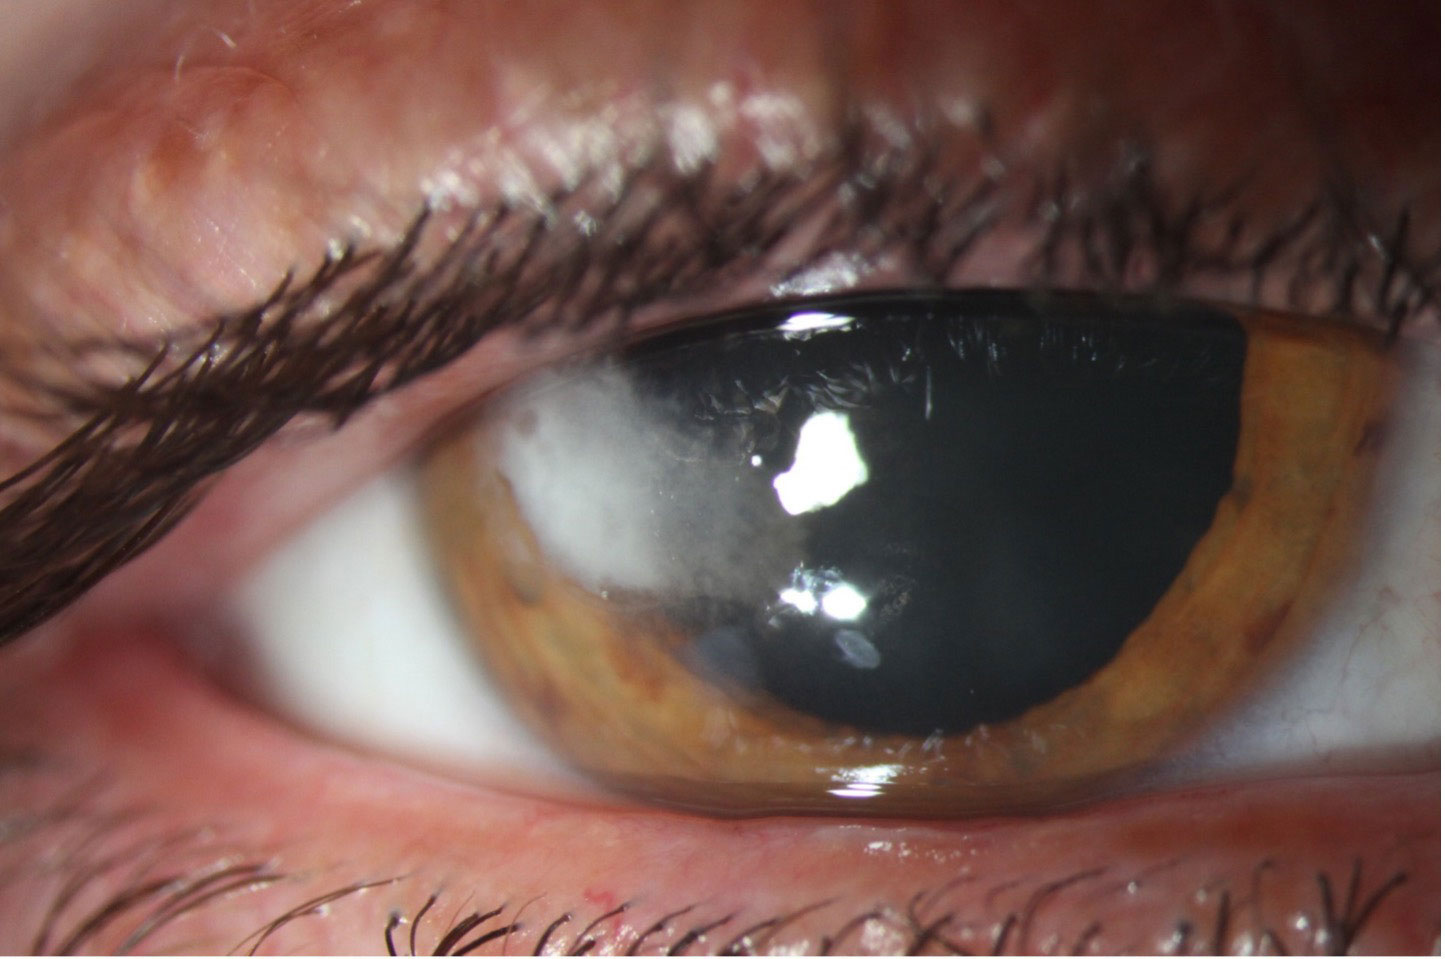 This patient presented with a history of recent ocular trauma. He denied significant pain but eventually sought eye care due to blurred vision. Despite the relative “quiet” appearance of his eye, the corneal culture revealed Fusarium species.